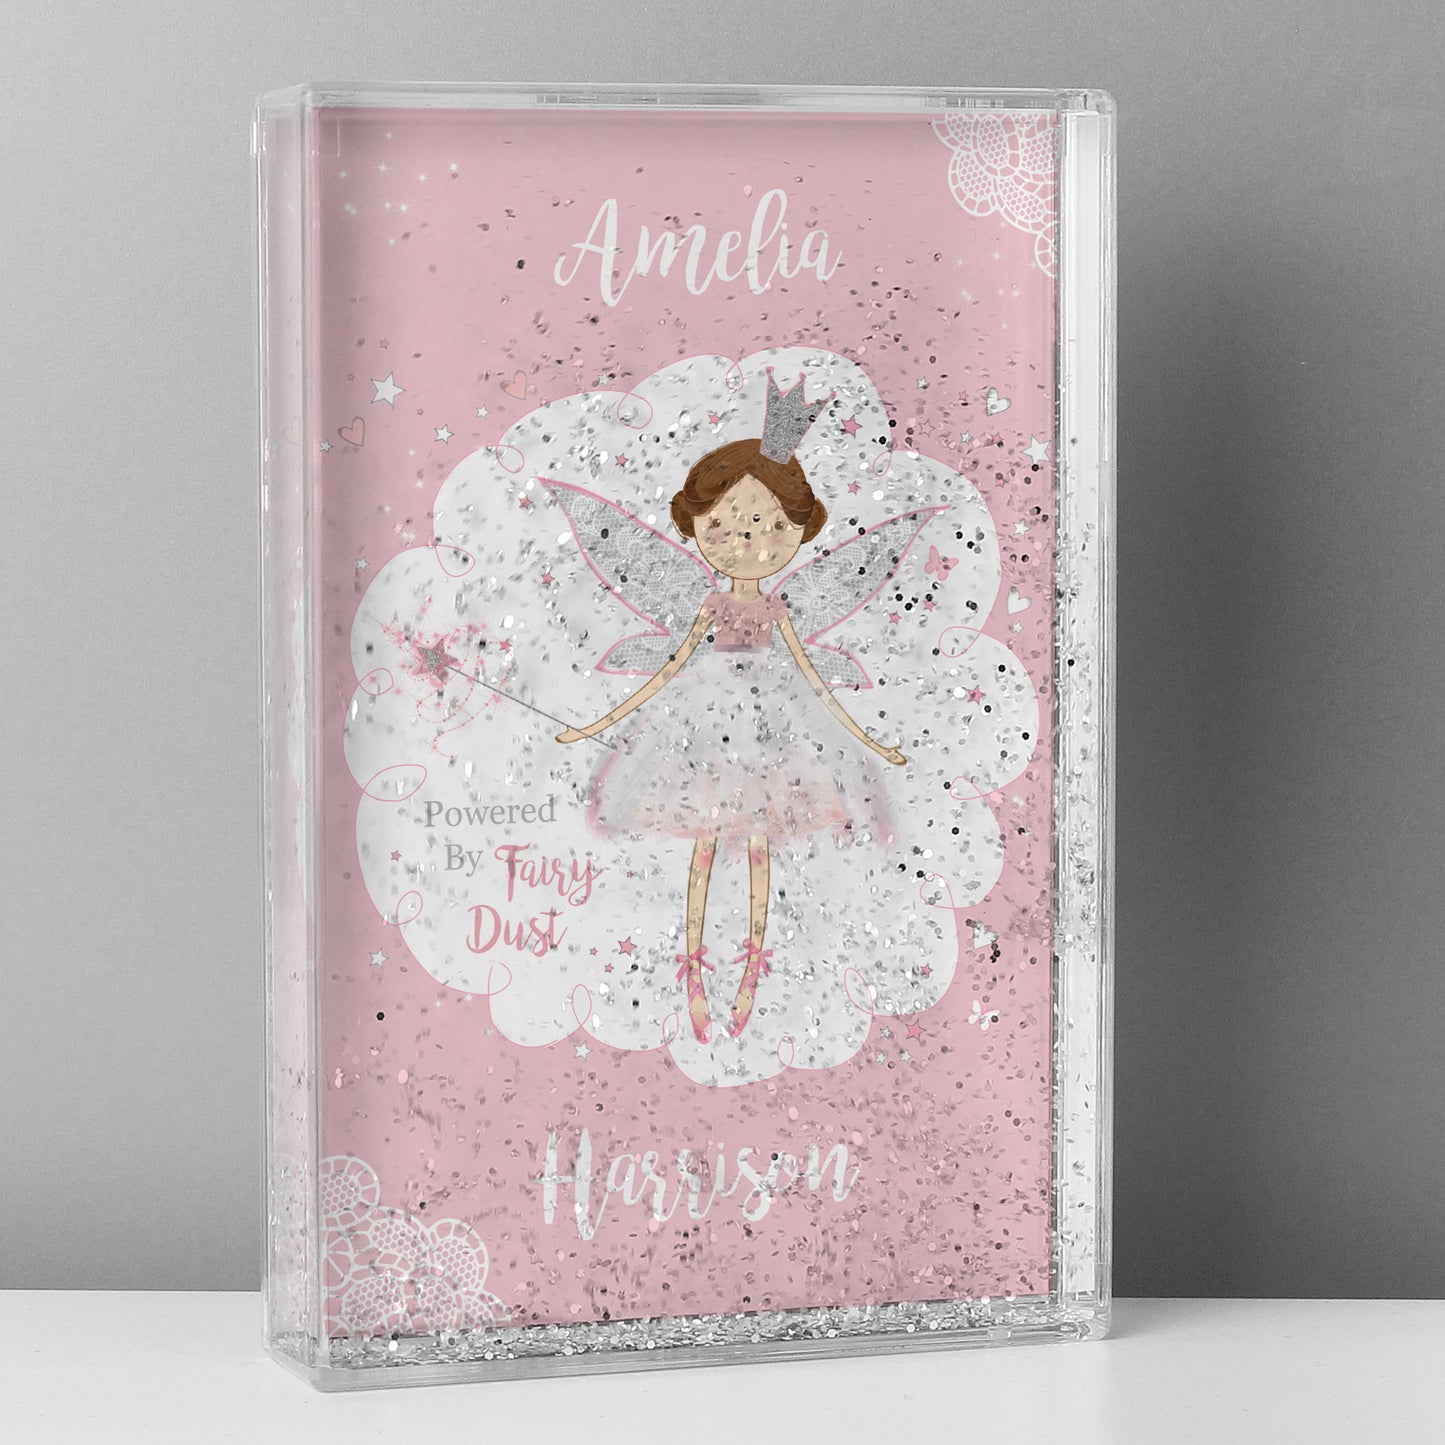 Fairy princess glitter shaker, personalised - Lilybet loves